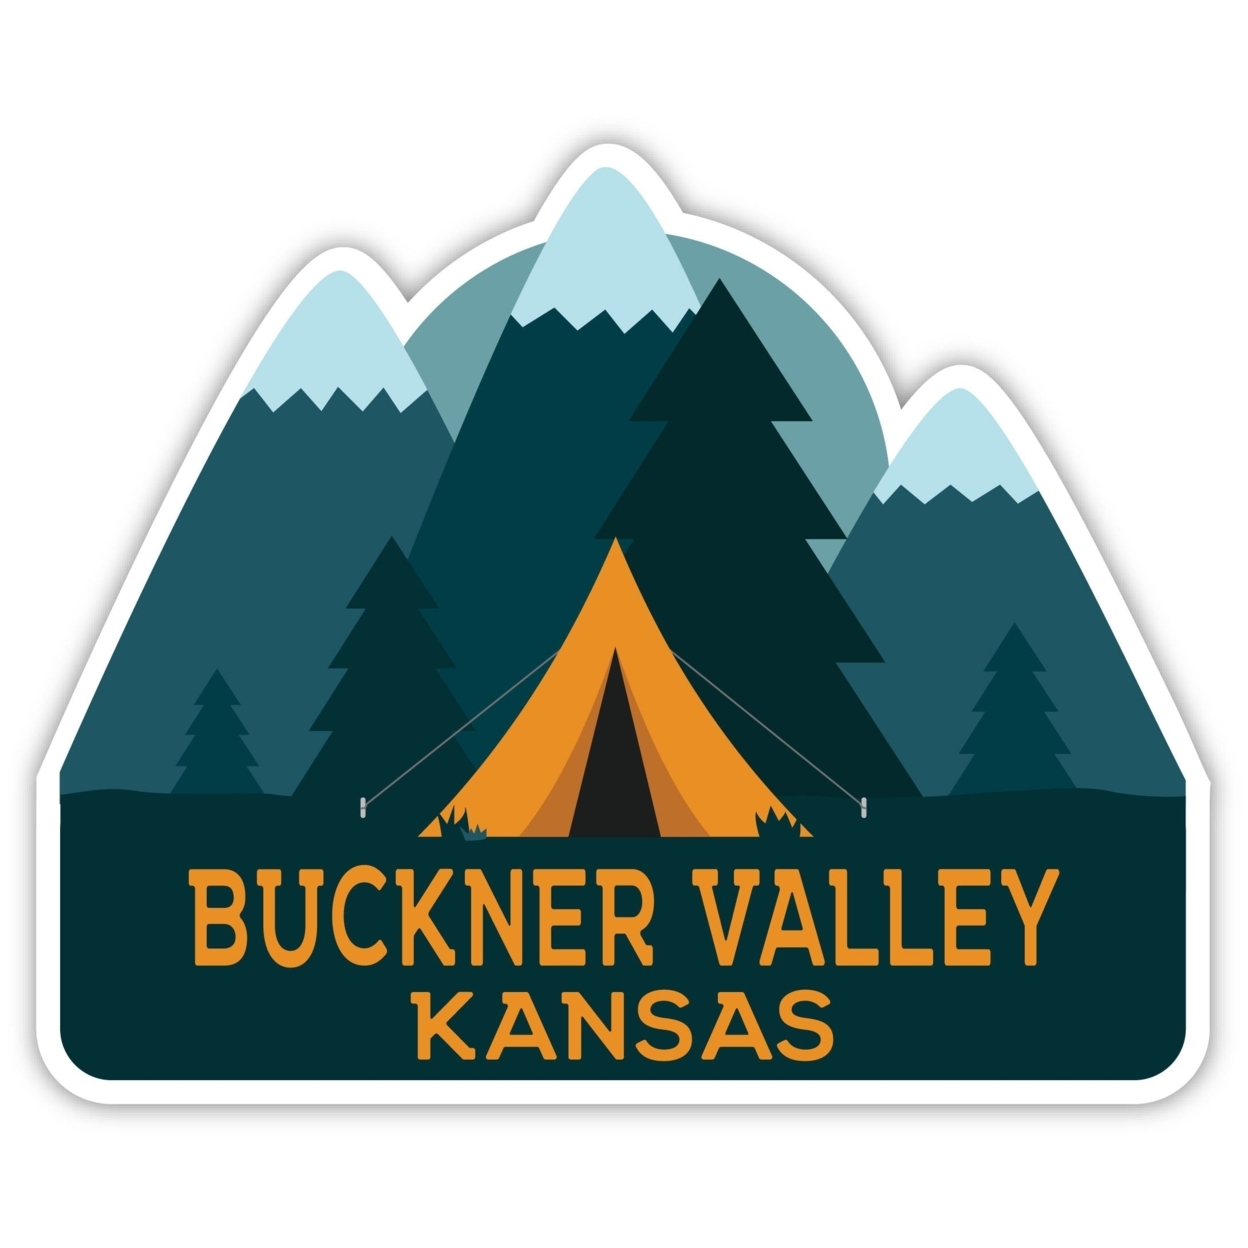 Buckner Valley Kansas Souvenir Decorative Stickers (Choose Theme And Size) - 4-Pack, 6-Inch, Tent